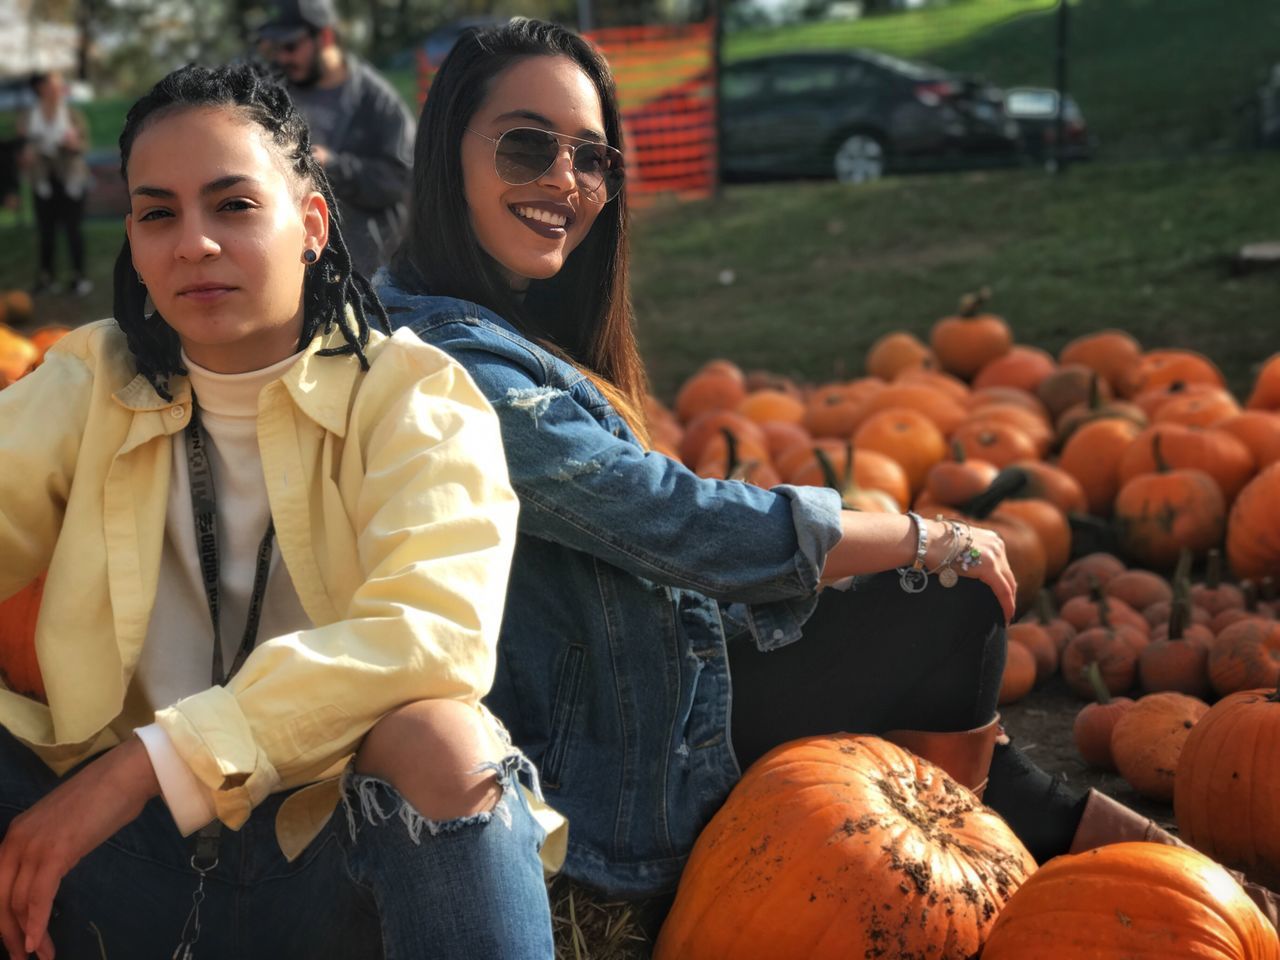 looking at camera, young adult, portrait, young women, pumpkin, smiling, casual clothing, front view, real people, standing, two people, lifestyles, outdoors, happiness, friendship, day, halloween, leisure activity, togetherness, beautiful woman, people